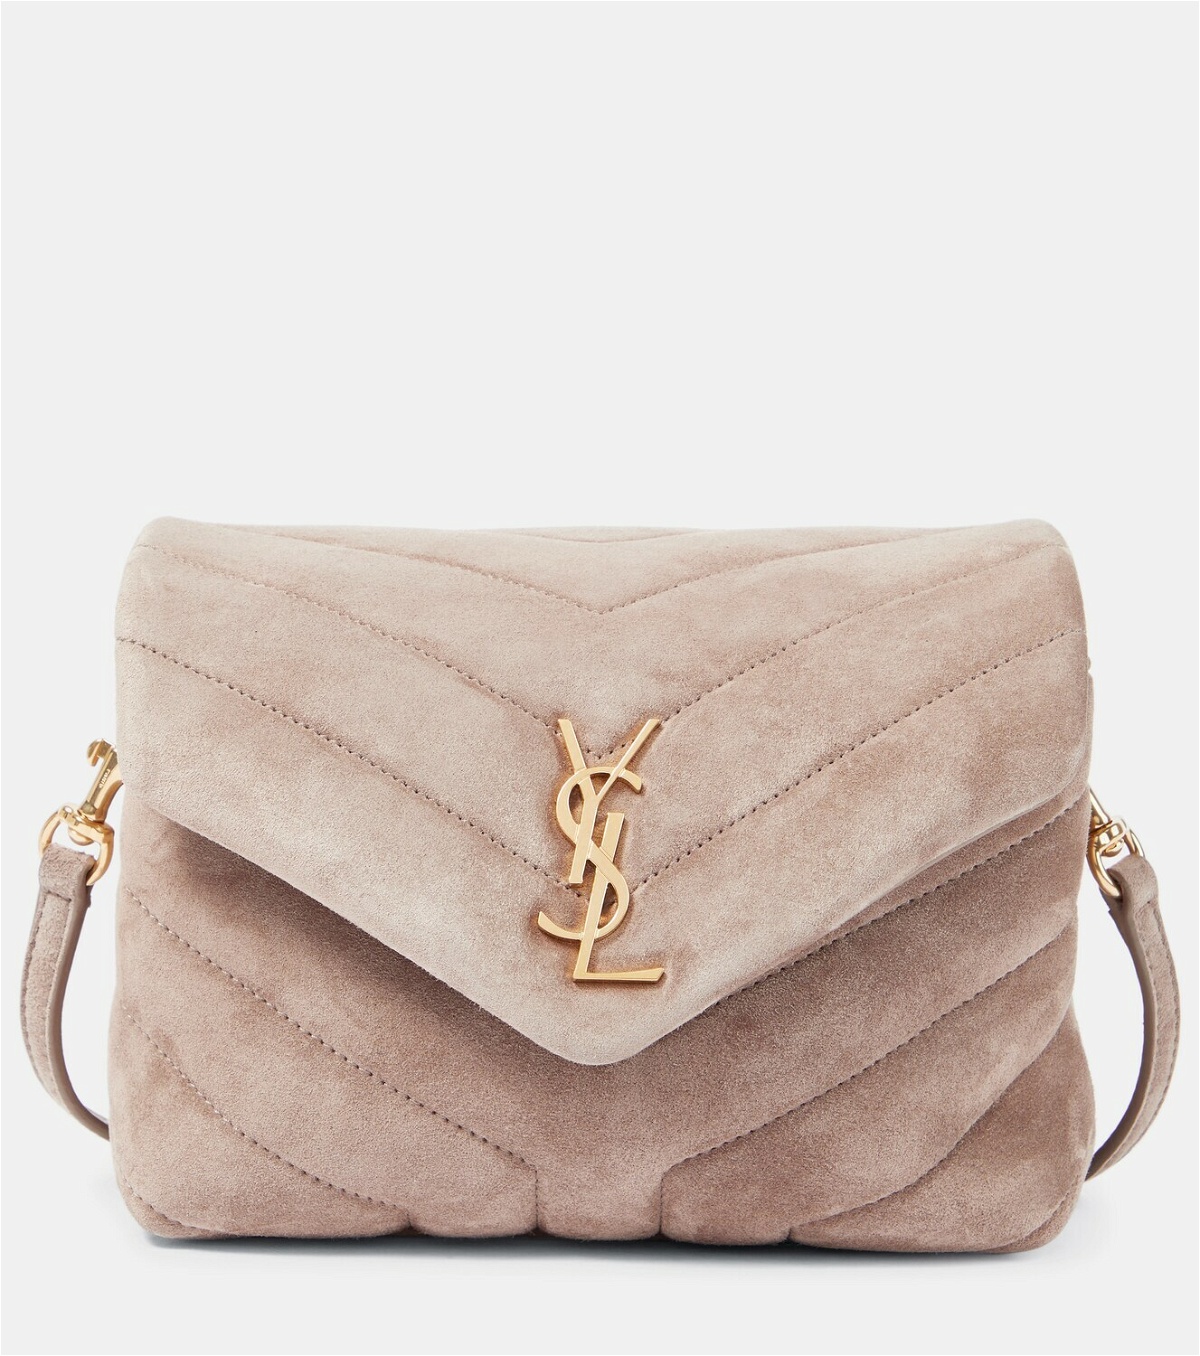 Saint Laurent Toy Loulou Leather Shoulder Bag in White